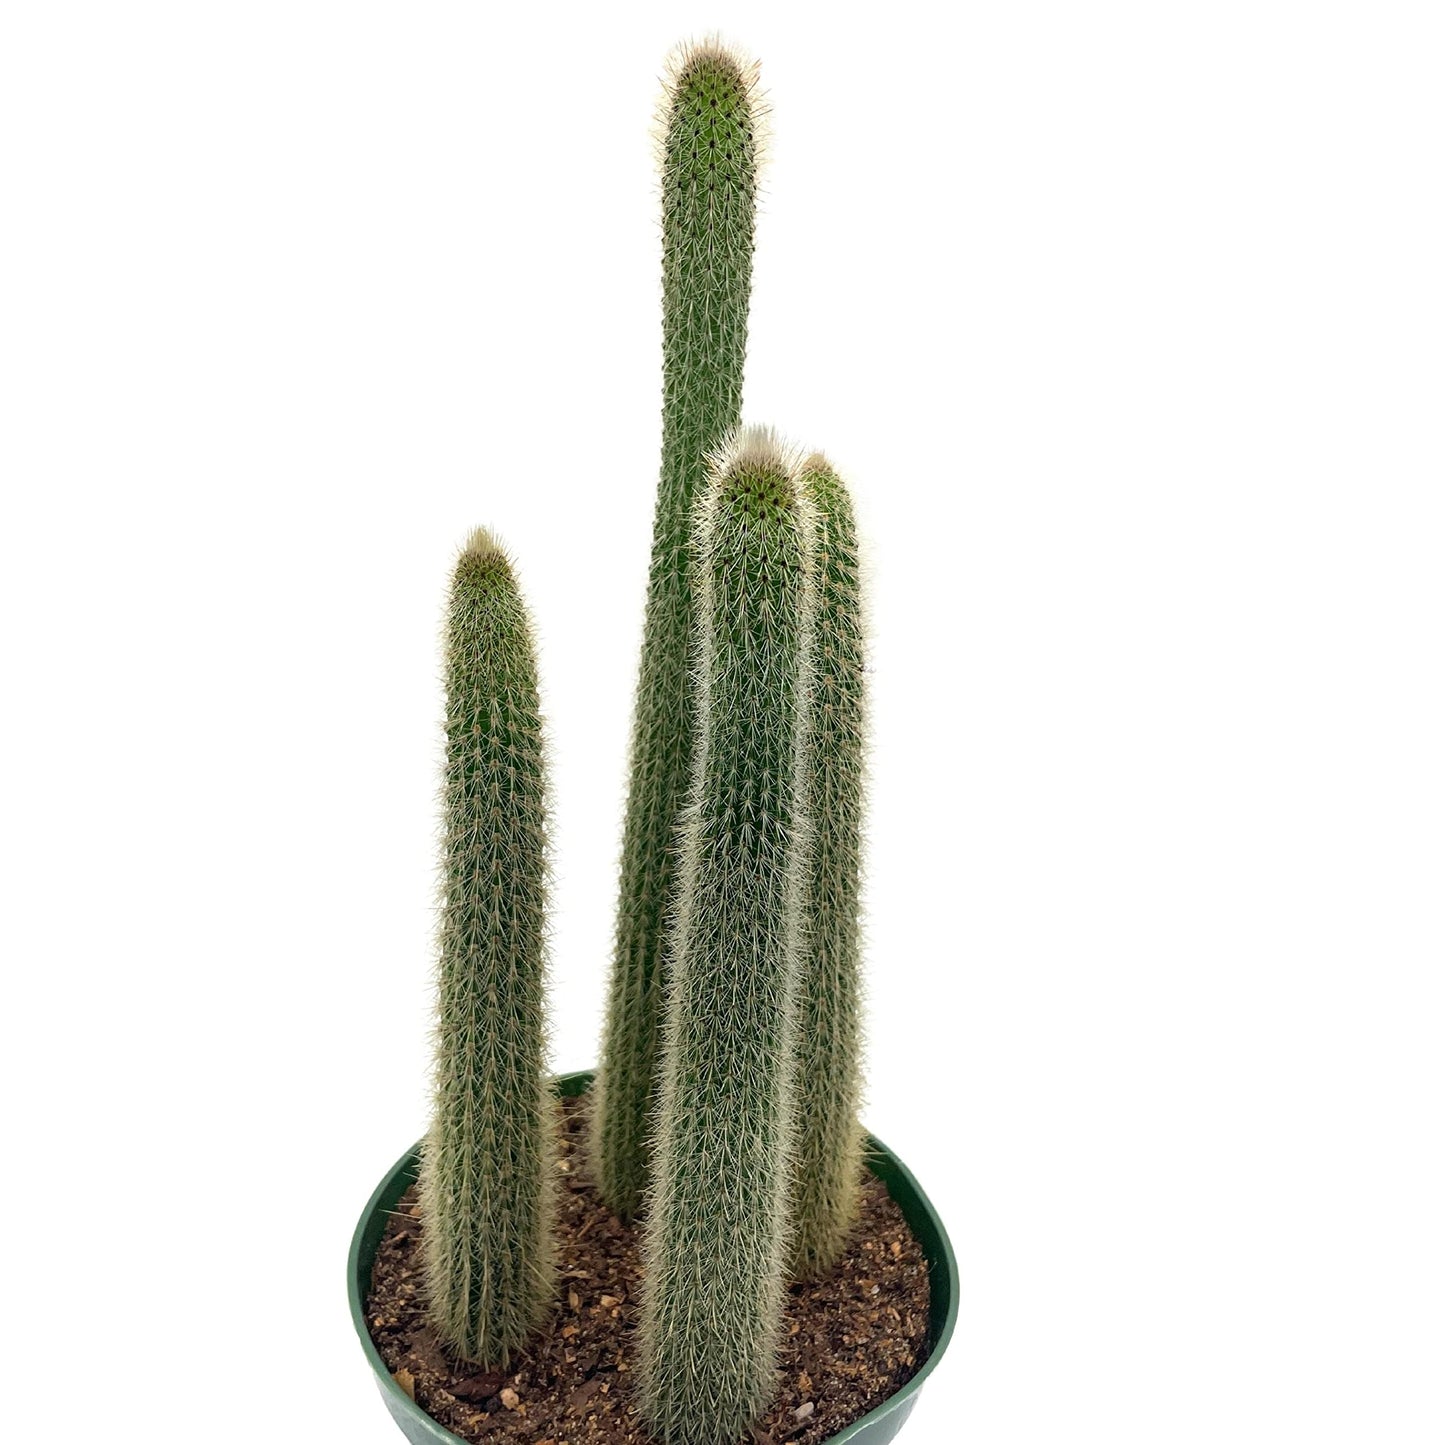 Old Man of The Andes, 6 inch, Huge Cactus, Oreocereus celsianus, Hairy Fuzzy Mountain Cacti